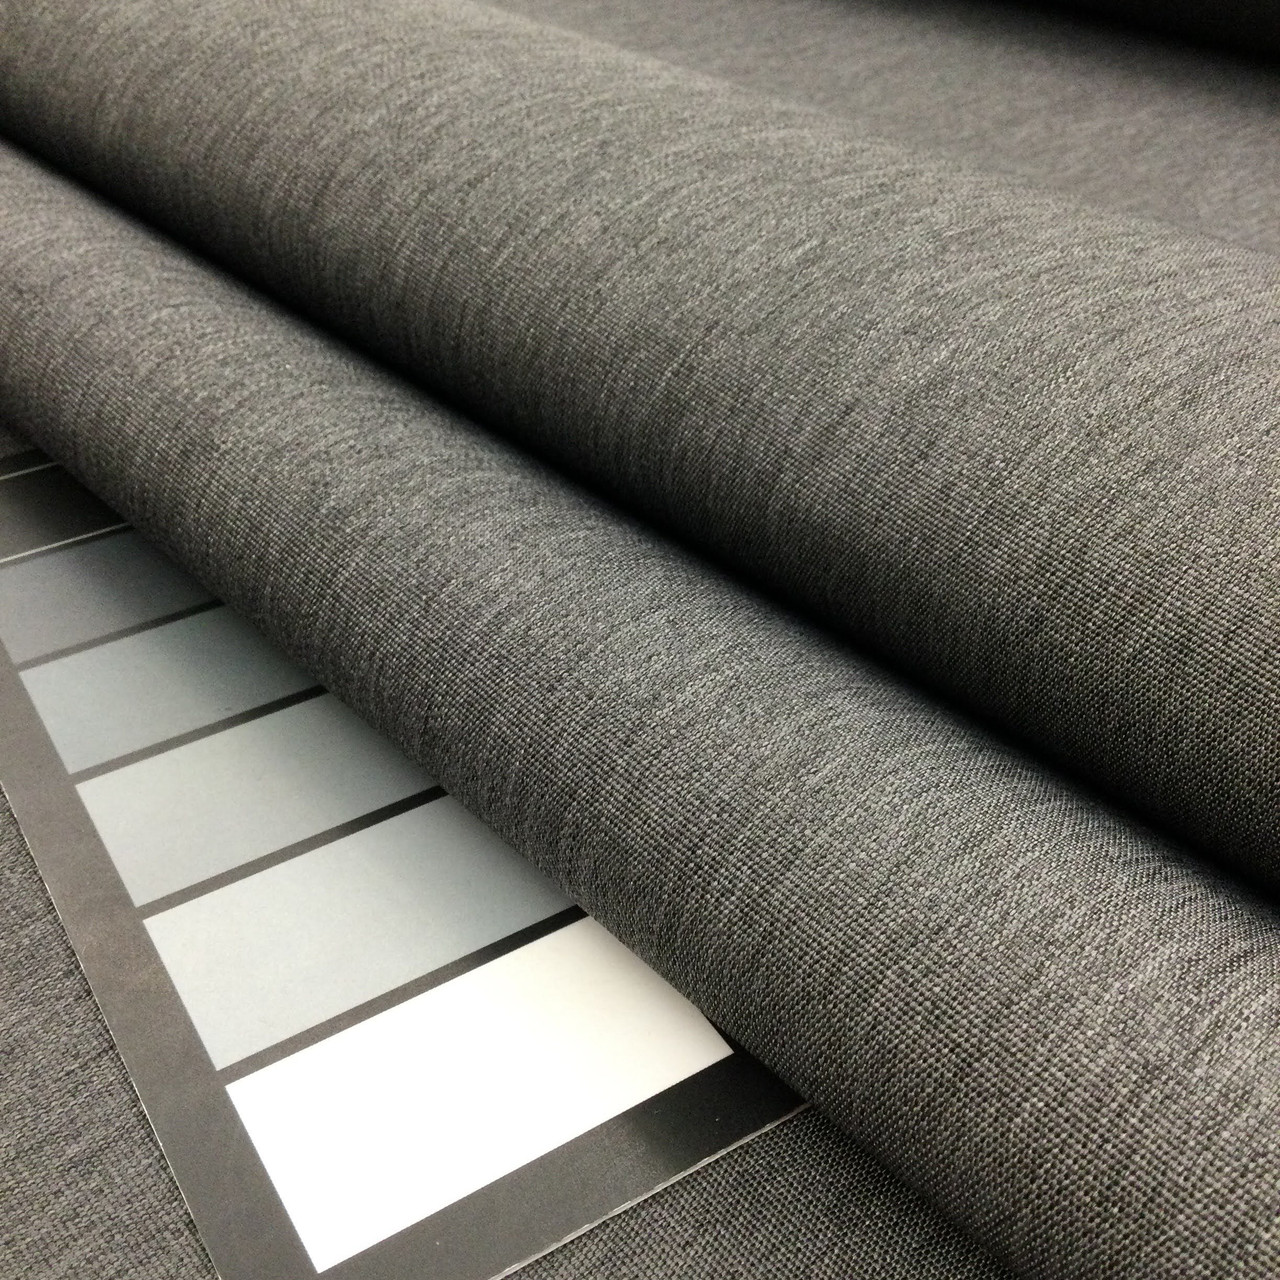 2.8 Yard Piece of Two Toned Grey OUTDOOR Fabric | Water-proof Upholstery /  Awning / Boat Cover | 54 Wide | By the Yard